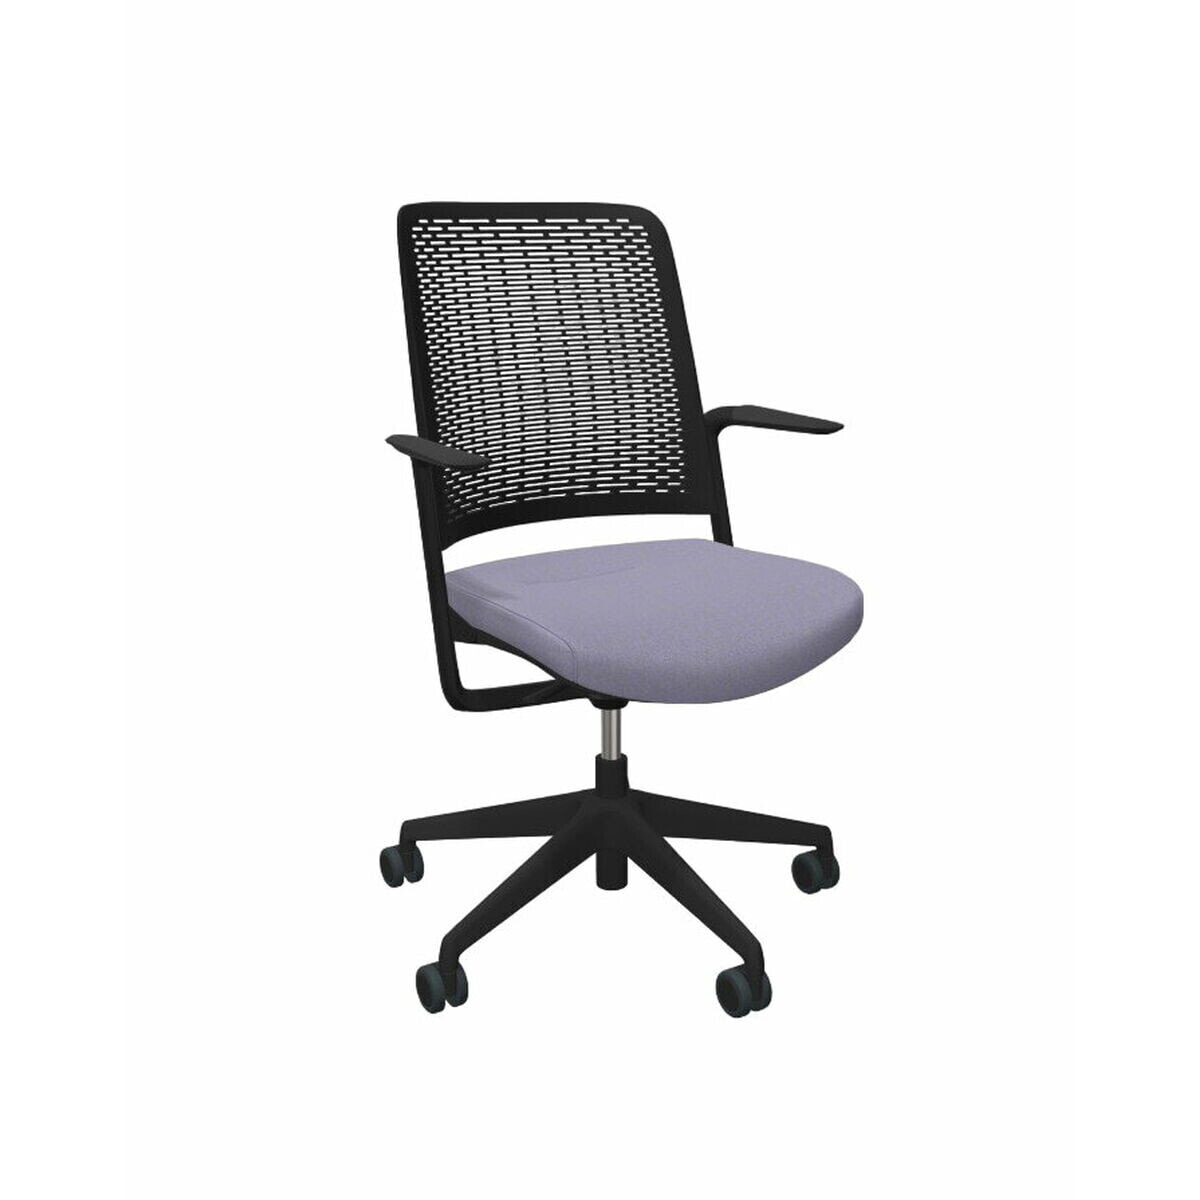 Office Chair WithMe Nowy Styl SNCSE11 Black Light grey